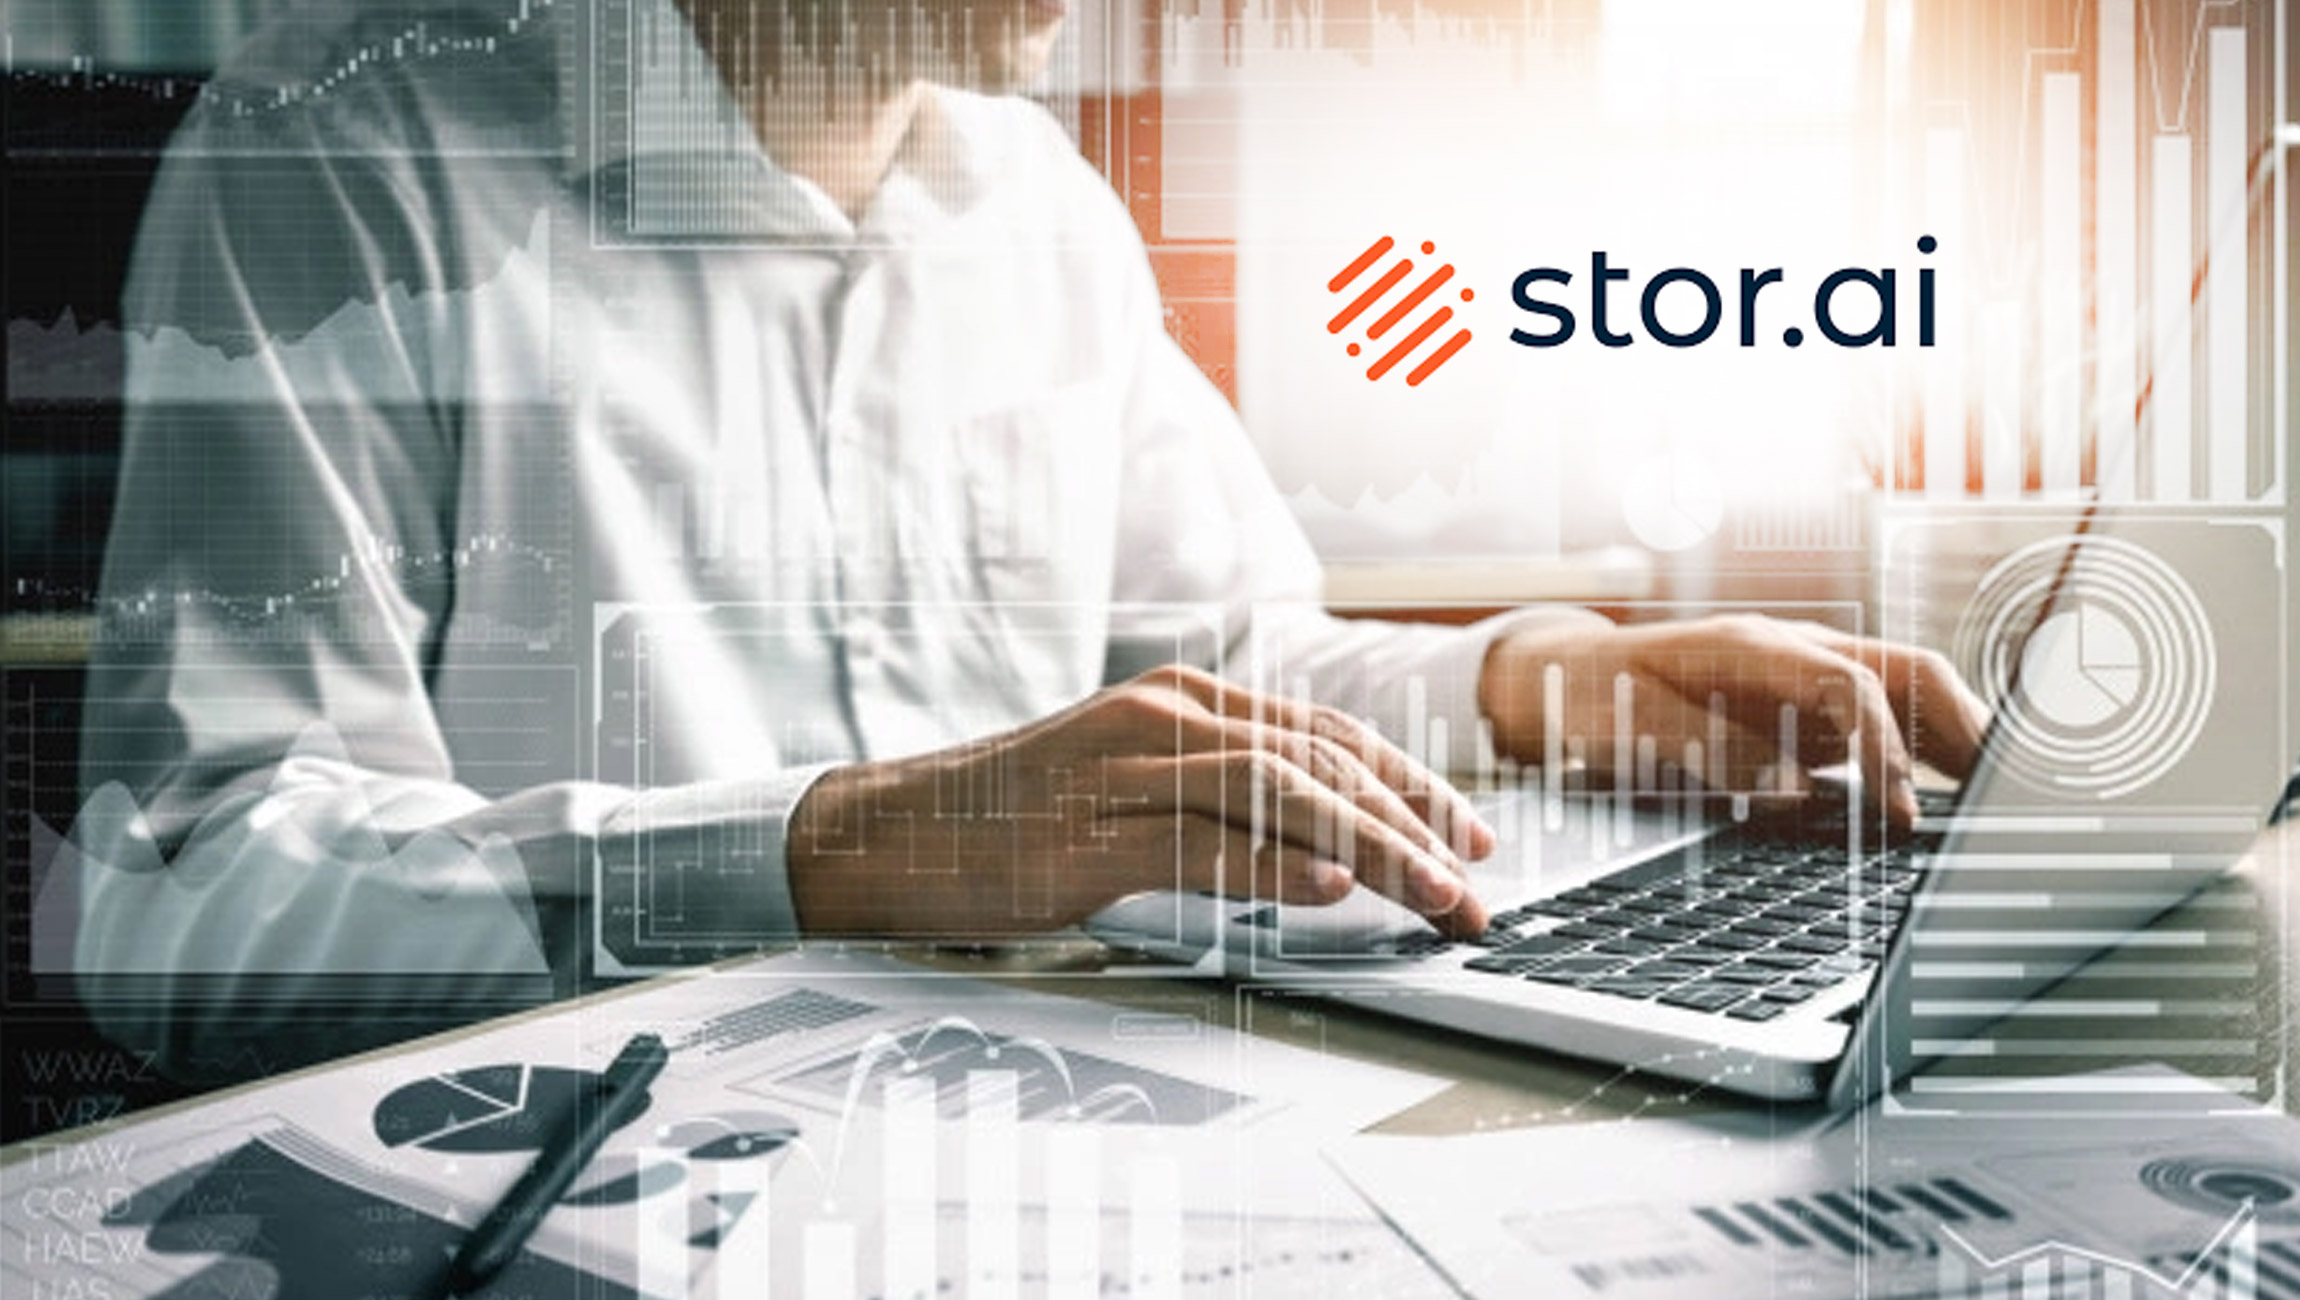 Stor.ai Hires Charlie Ward Wright IV as President and Mendel Gniwisch is Promoted to CEO to Expand Leadership Team